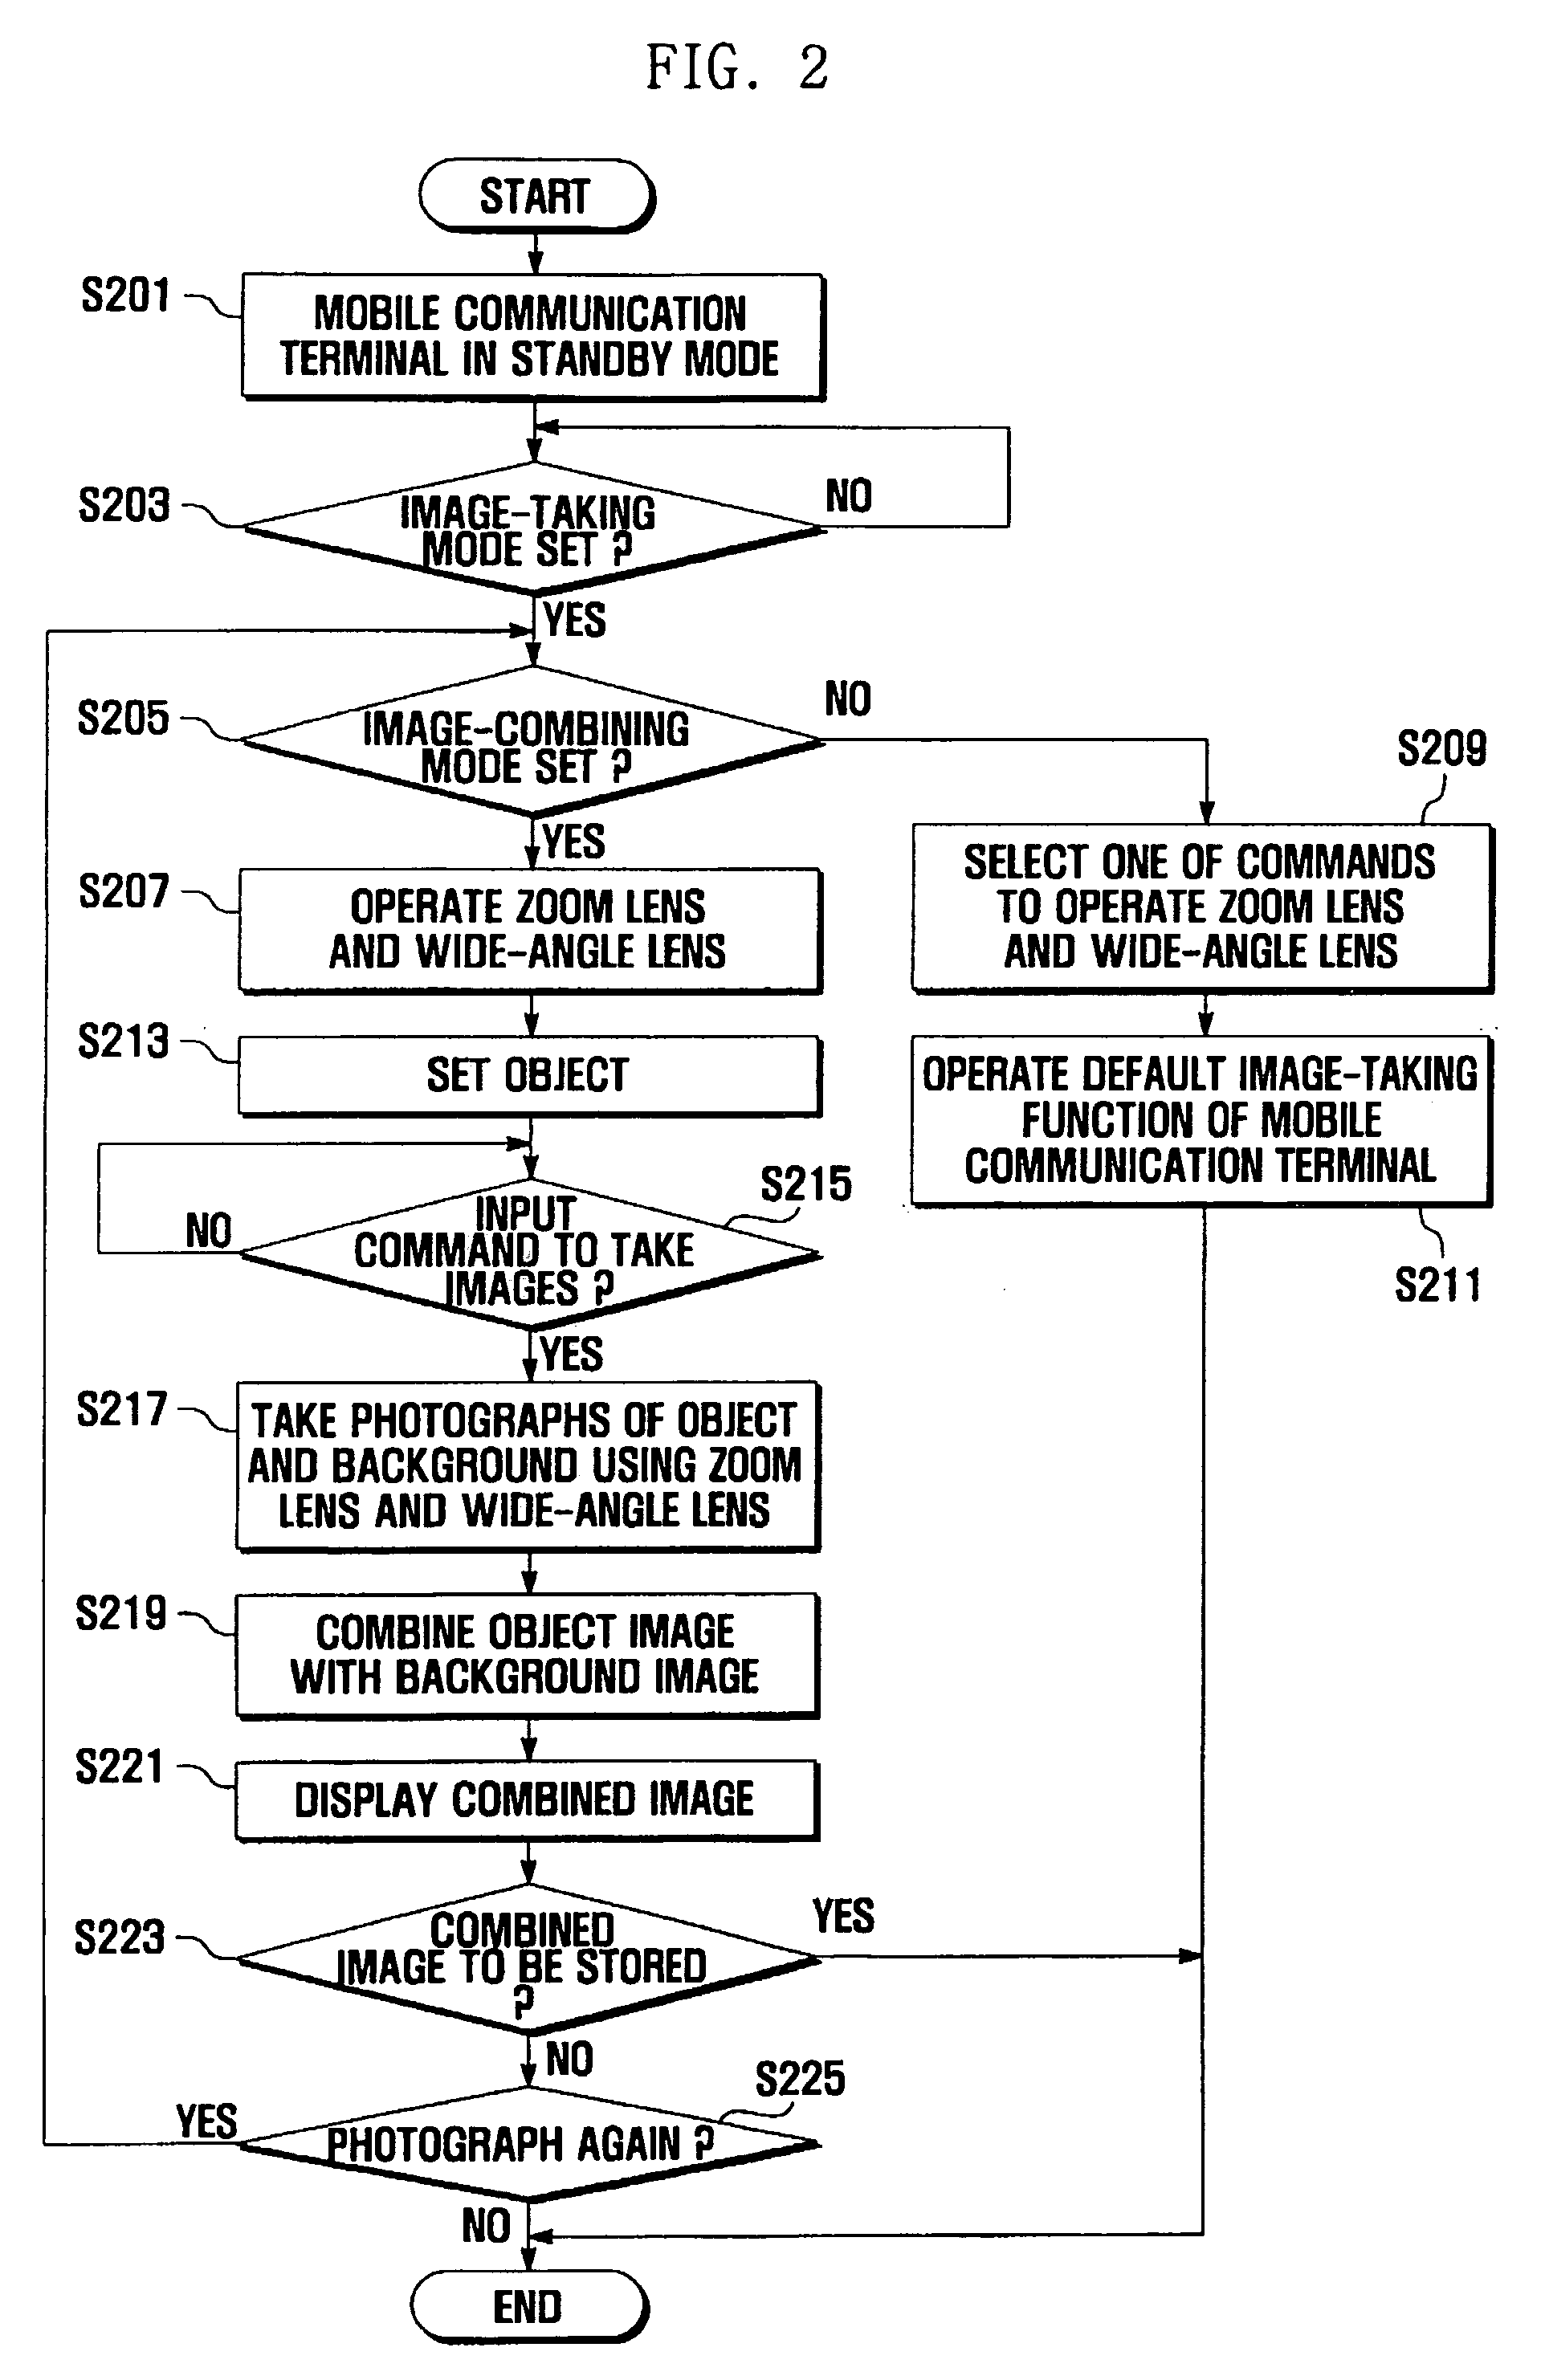 Method and apparatus for taking images using mobile communication terminal with plurality of camera lenses